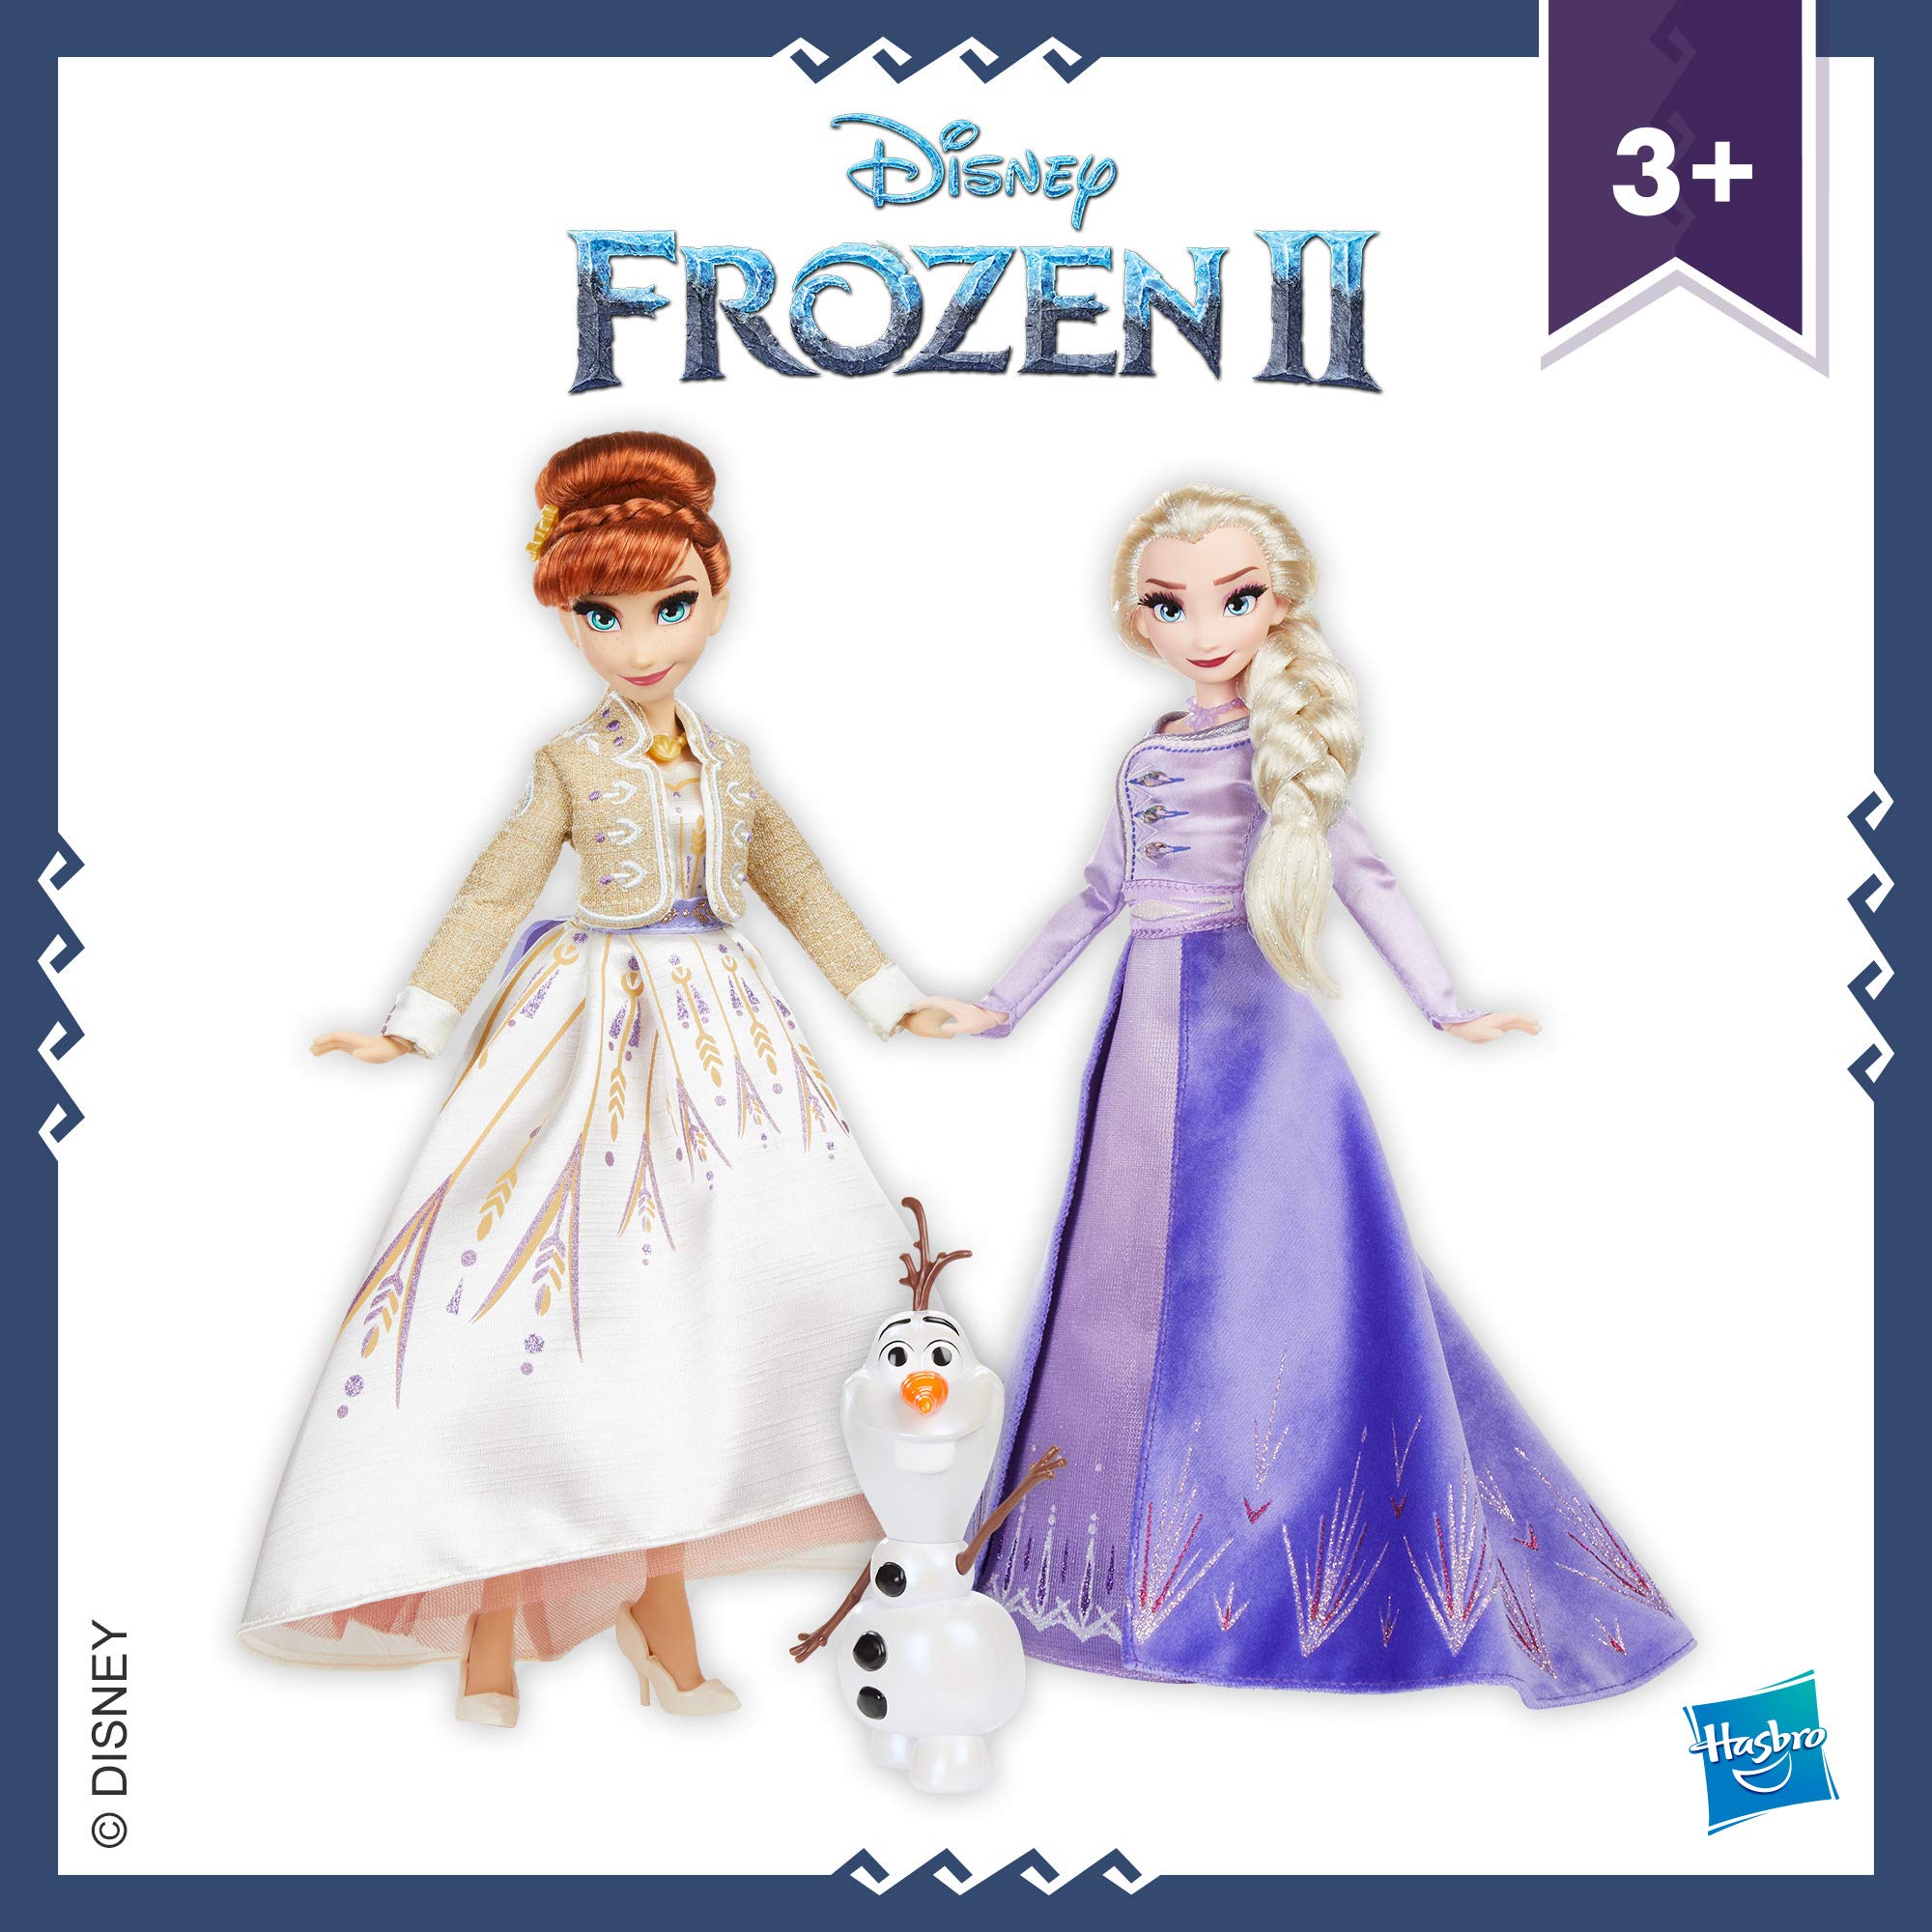 Disney Frozen Elsa, Anna and Olaf Fashion Doll Set with Dresses and Shoes Inspired by Disney's Frozen 2 – Toy for Children Aged 3 and Up [Amazon Exclusive] - Amazon Exclusive